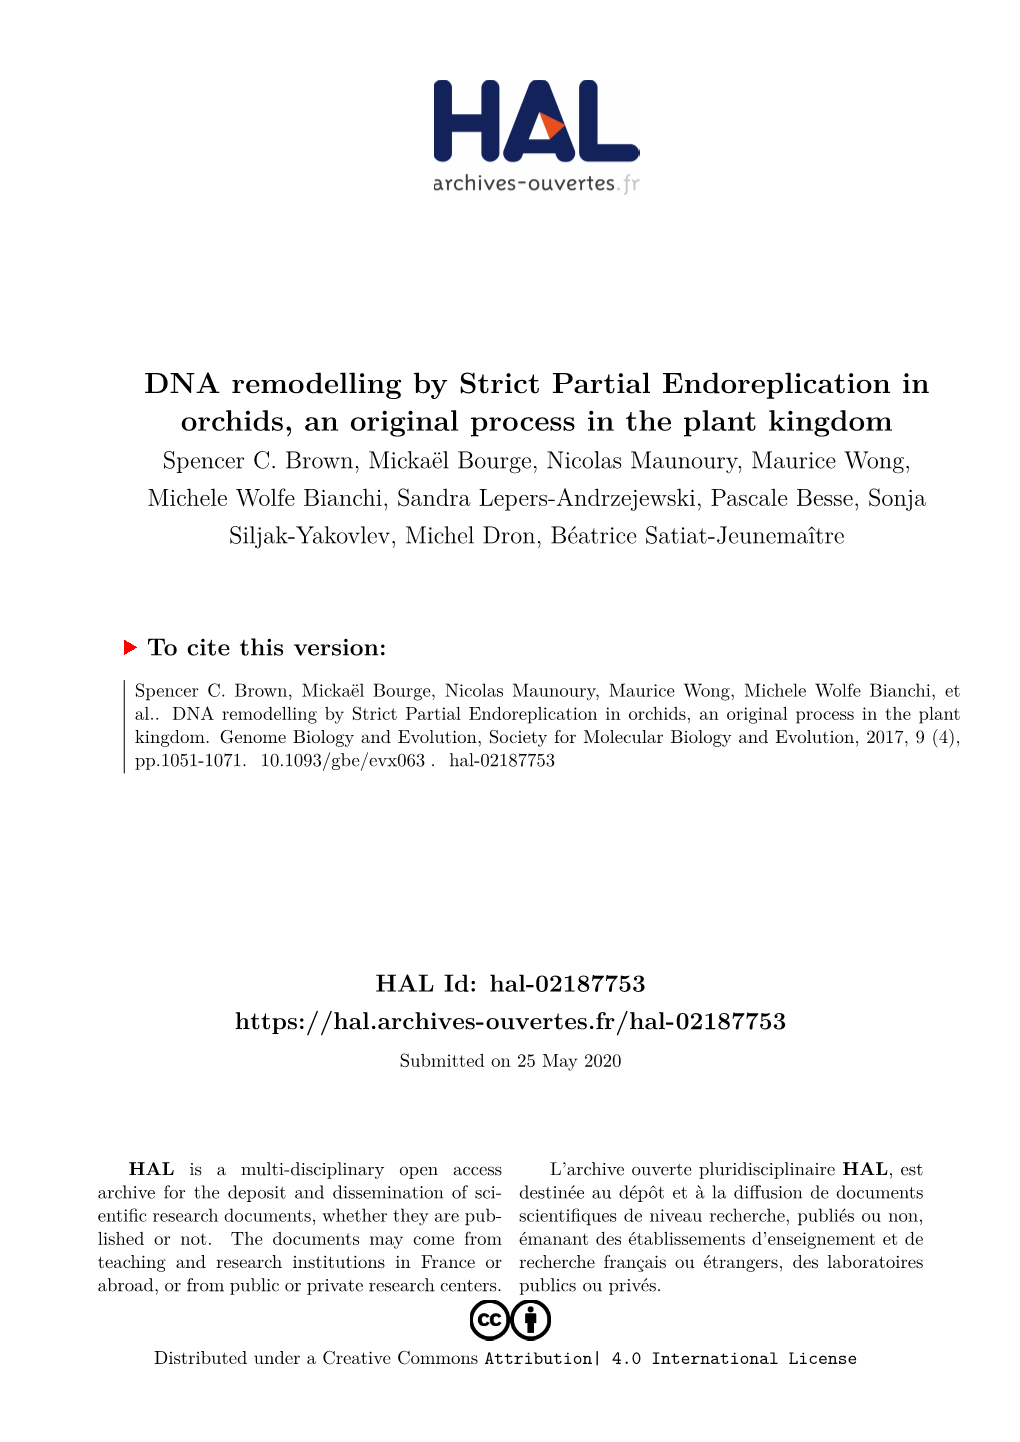 DNA Remodelling by Strict Partial Endoreplication in Orchids, an Original Process in the Plant Kingdom Spencer C